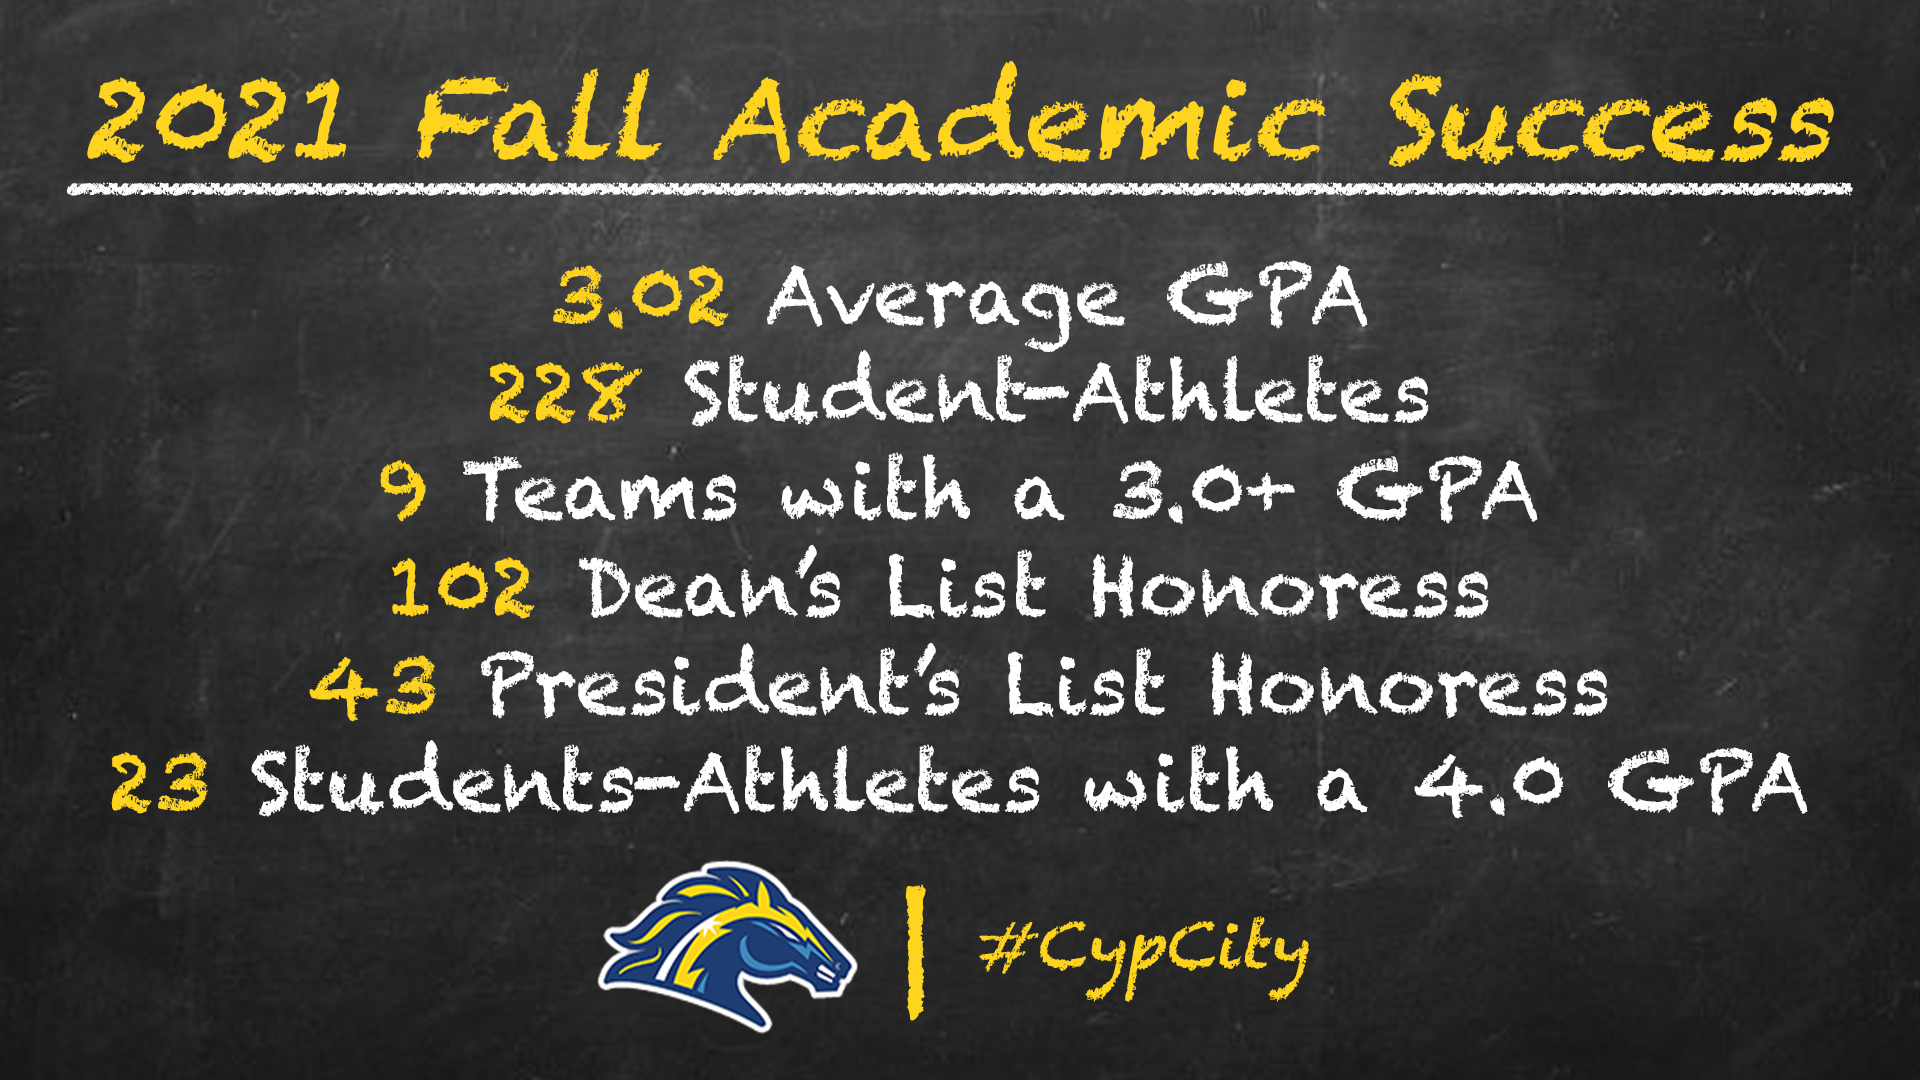 Charger Student-Athletes Step-Up to Achieve Significant Academic Success